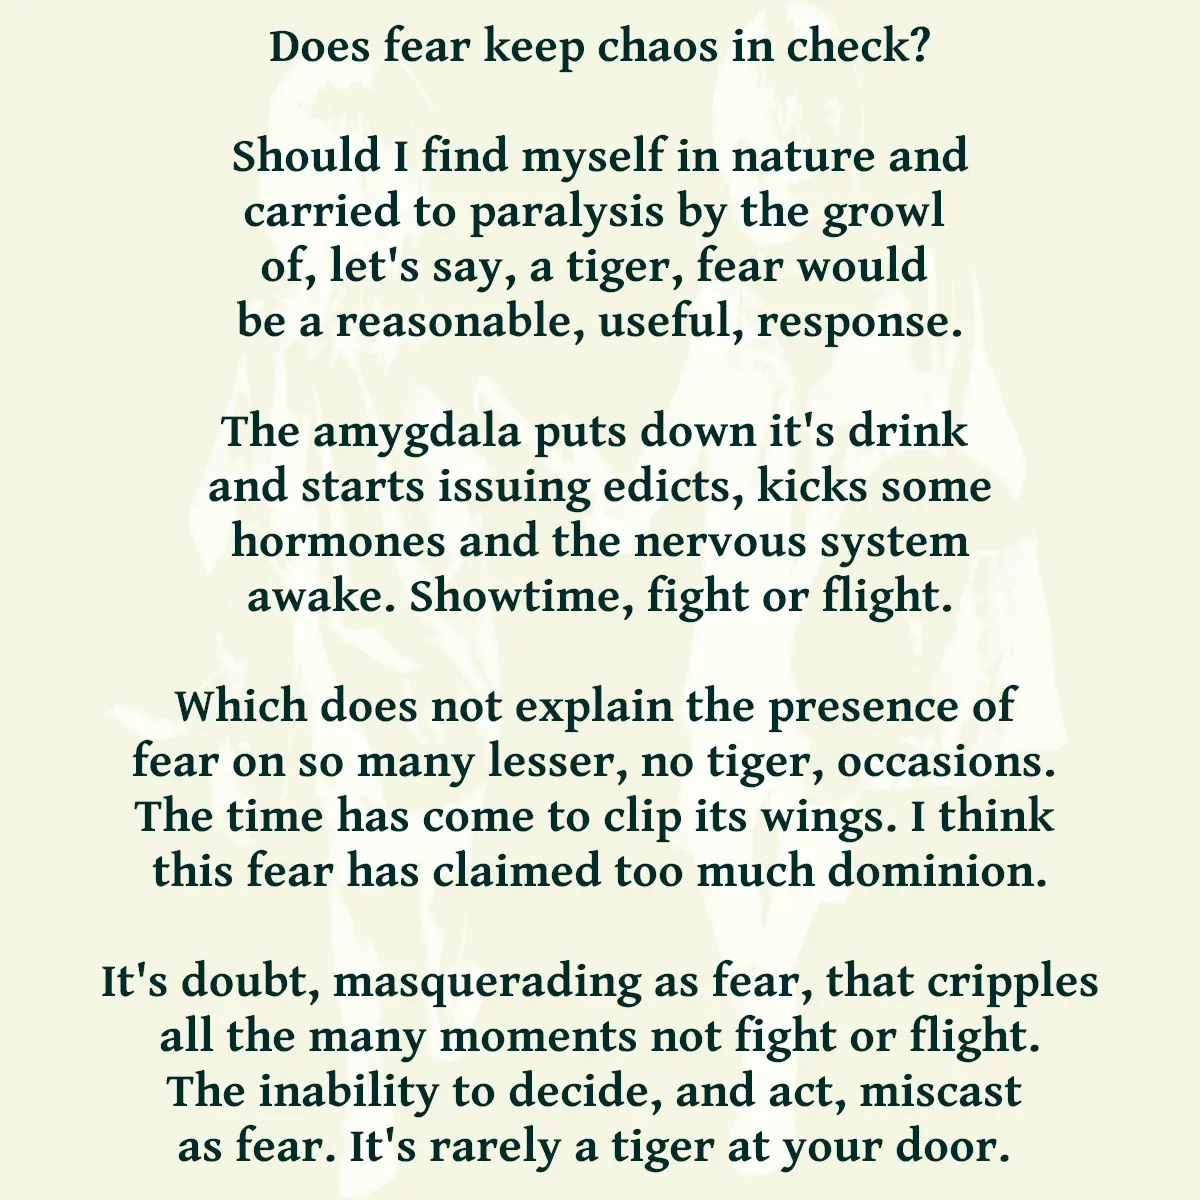 Does fear keep chaos in check? Should I find myself in nature and carried to paralysis by the growl of, let's say, a tiger, fear would be a reasonable, useful, response. The amygdala puts down it's drink and starts issuing edicts, kicks some hormones and the nervous system awake. Showtime, fight or flight. Which does not explain the presence of fear on so many lesser, no tiger, occasions. The time has come to clip its wings. I think this fear has claimed too much dominion. It's doubt, masquerading as fear, that cripples all the many moments not fight or flight. The inability to decide, and act, miscast as fear. It's rarely a tiger at your door.